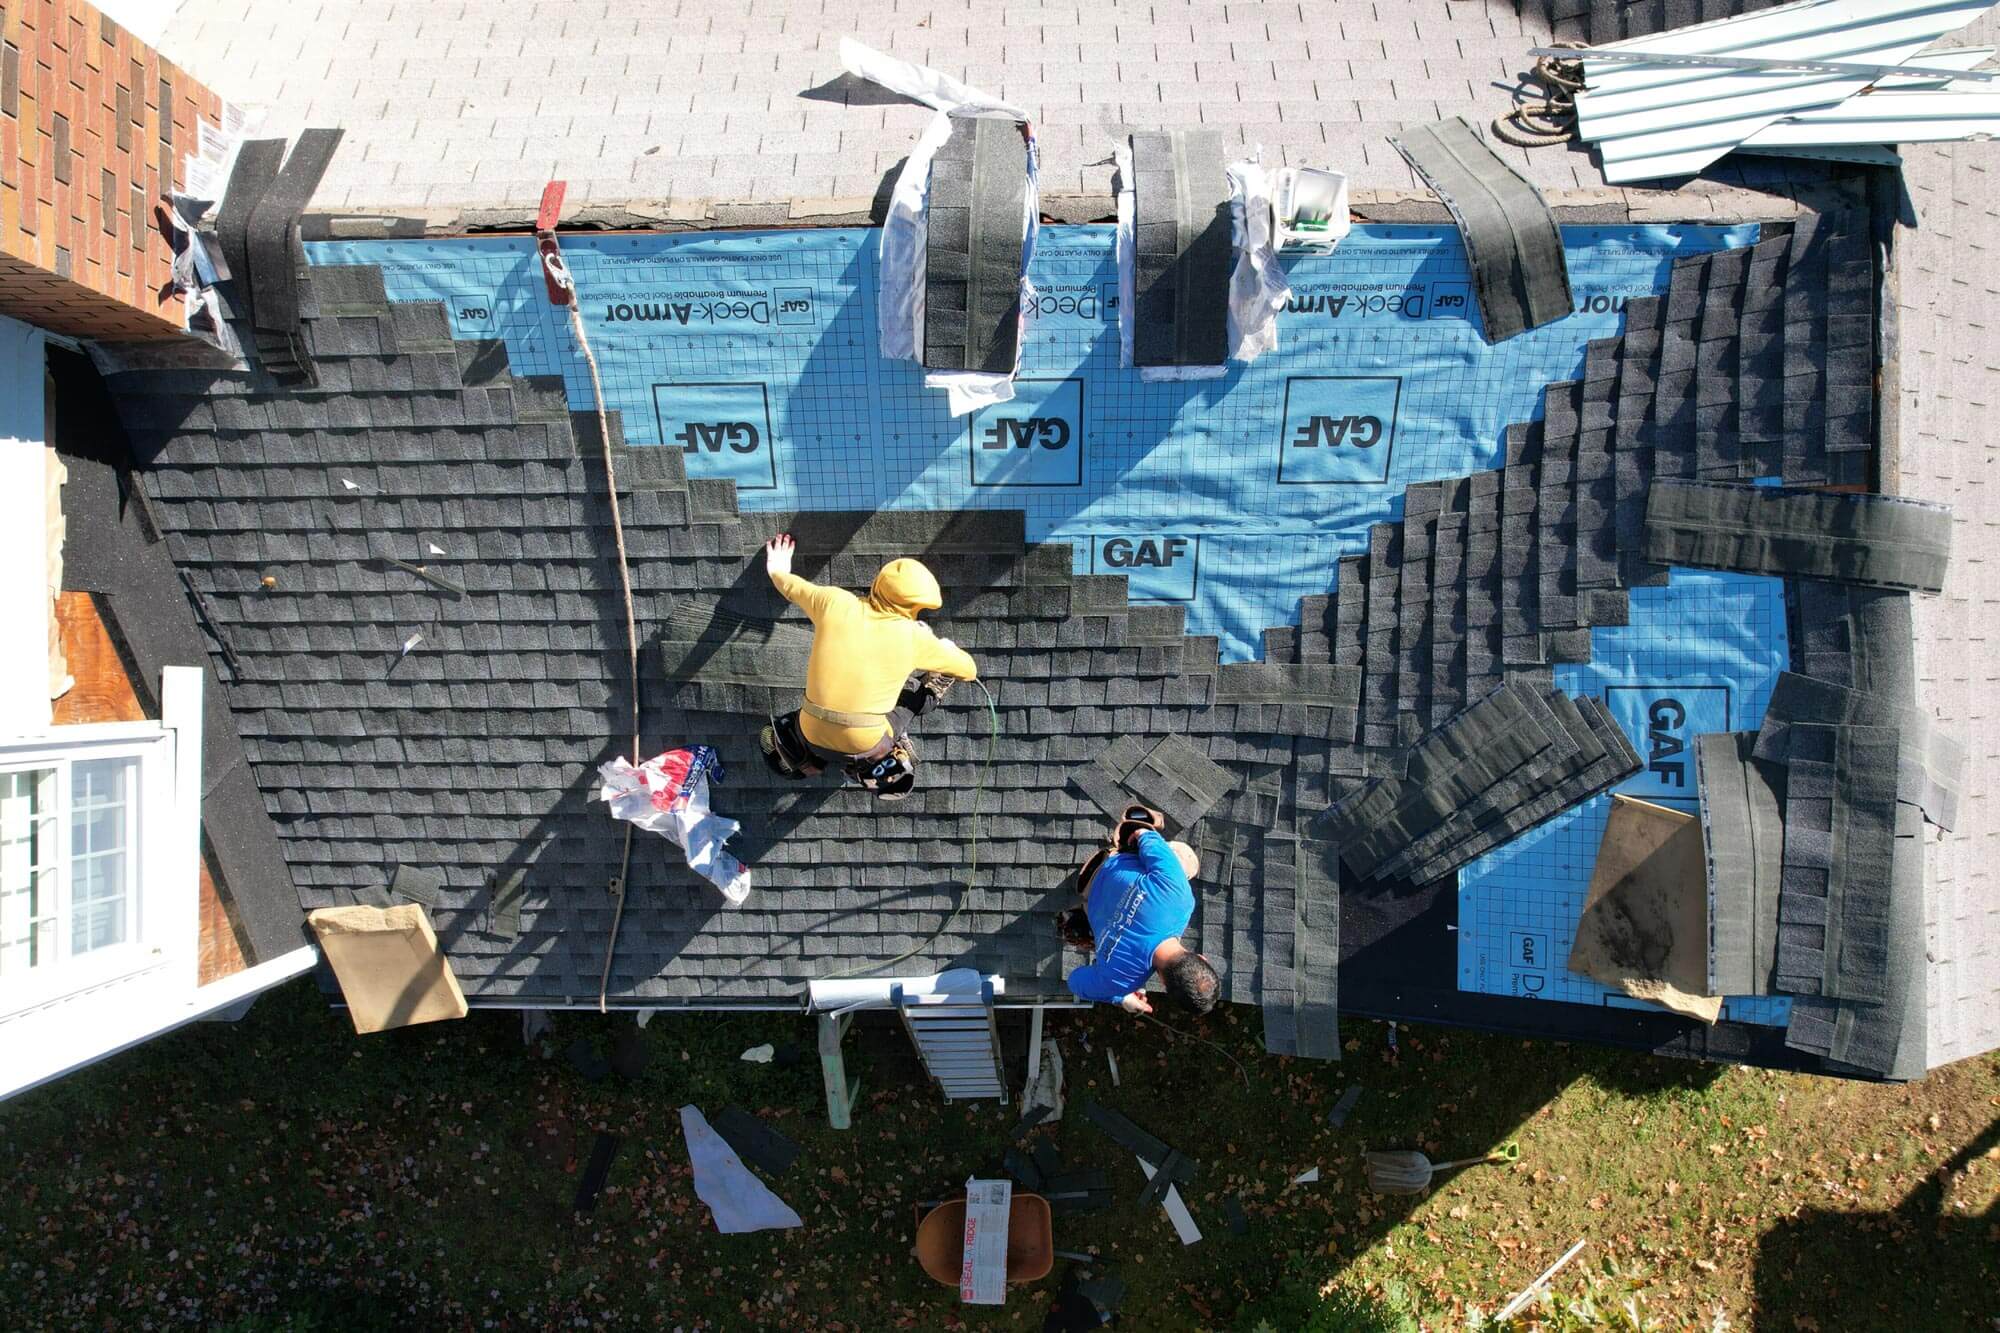 Architectural Roof Shingles